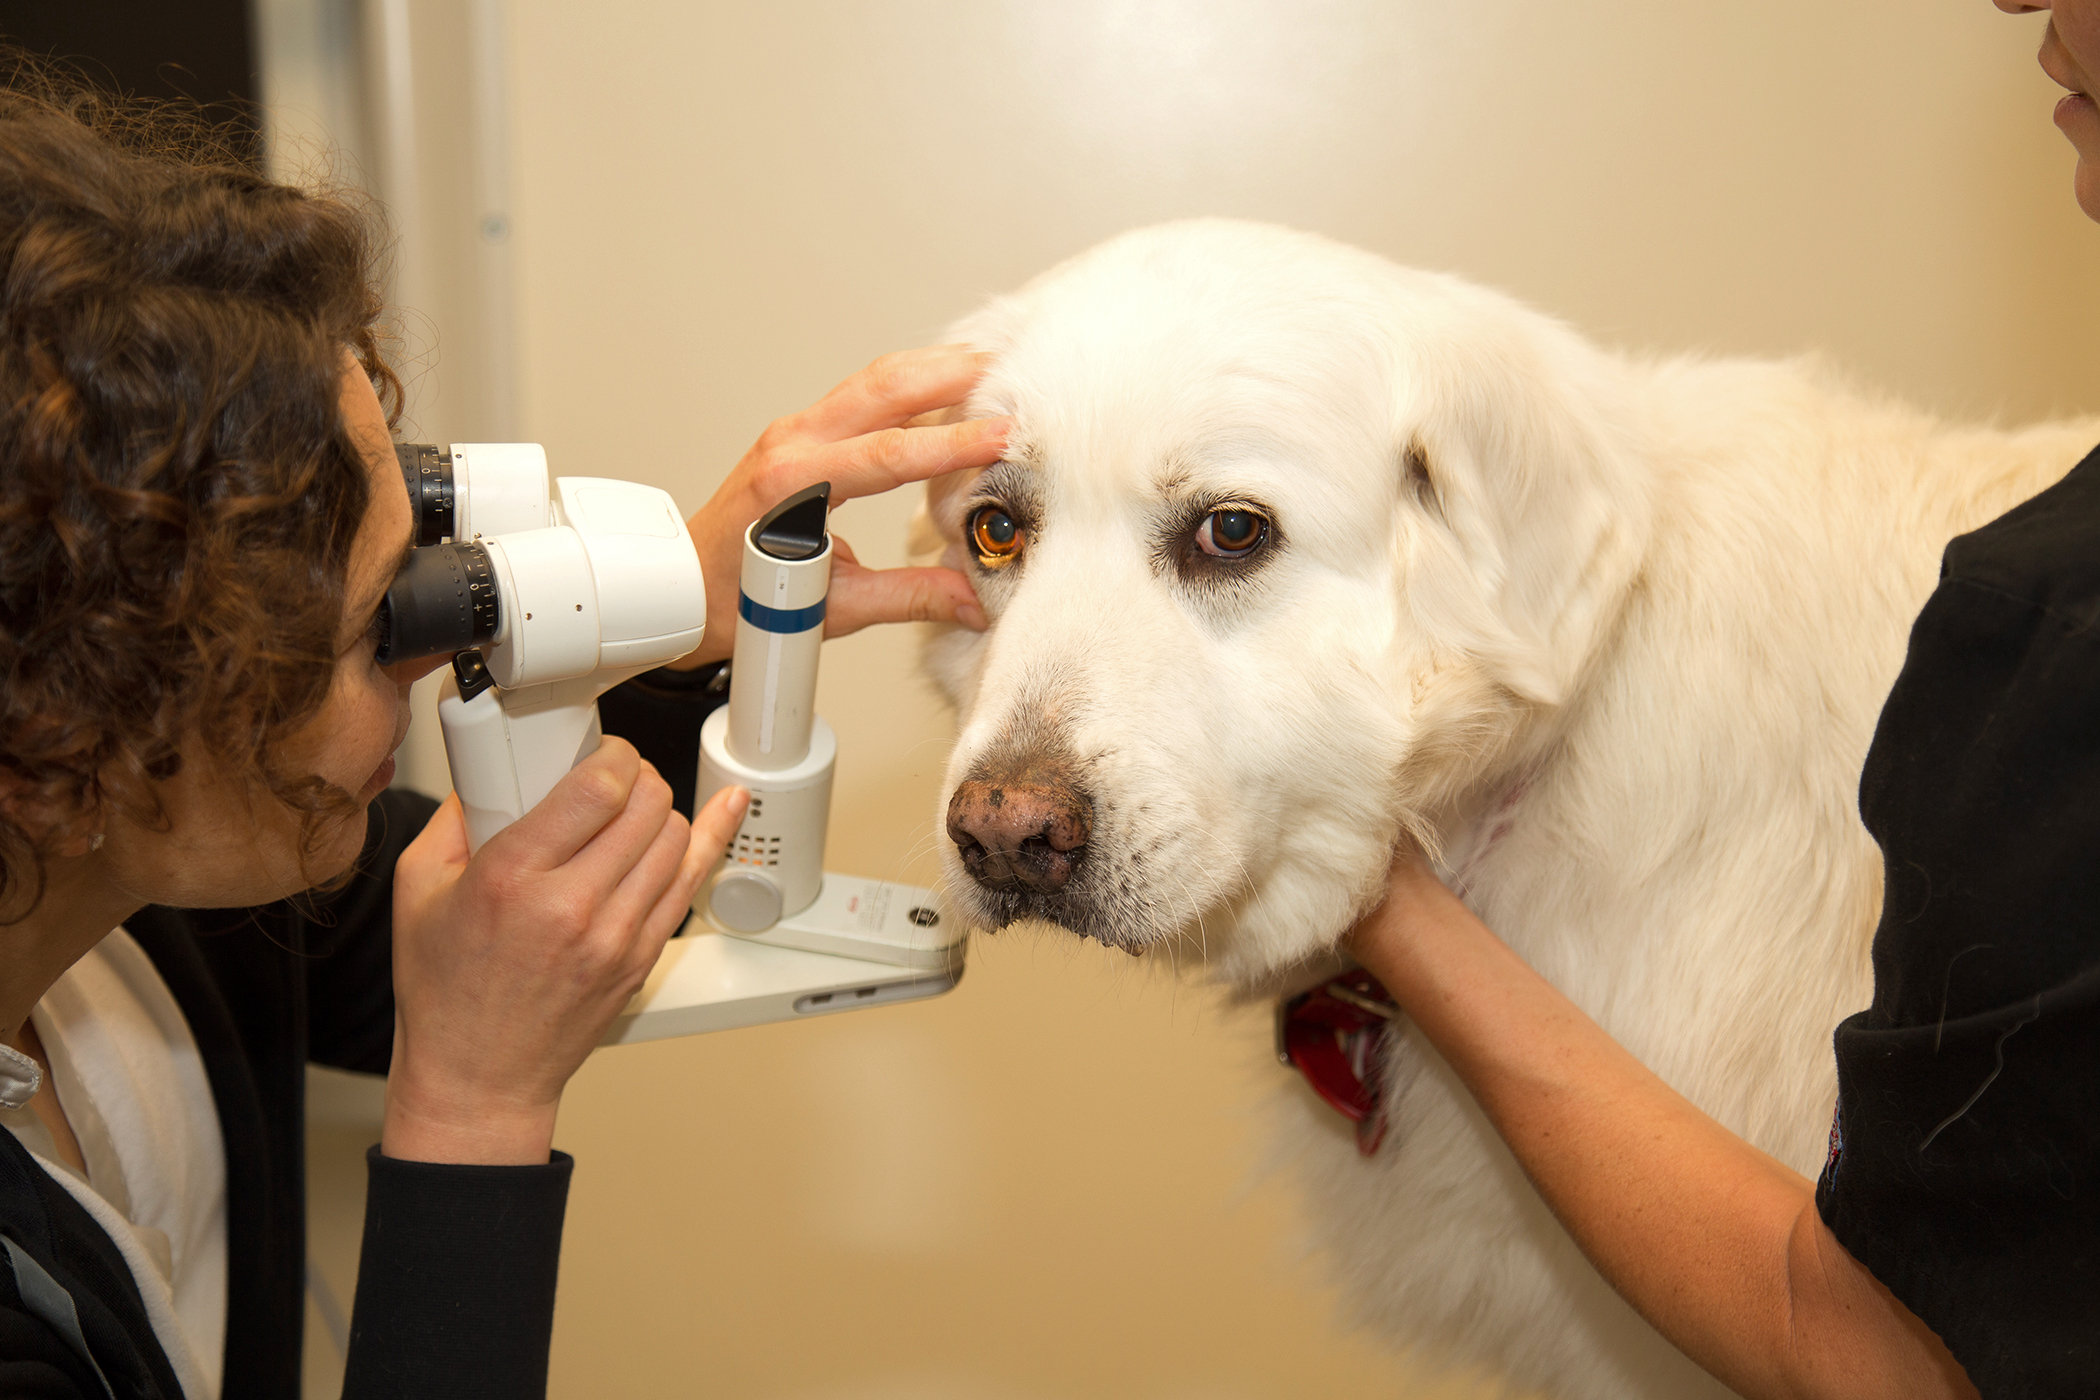 Athens veterinarians to participate in 2016 national service animal eye  exam event - UGA Today